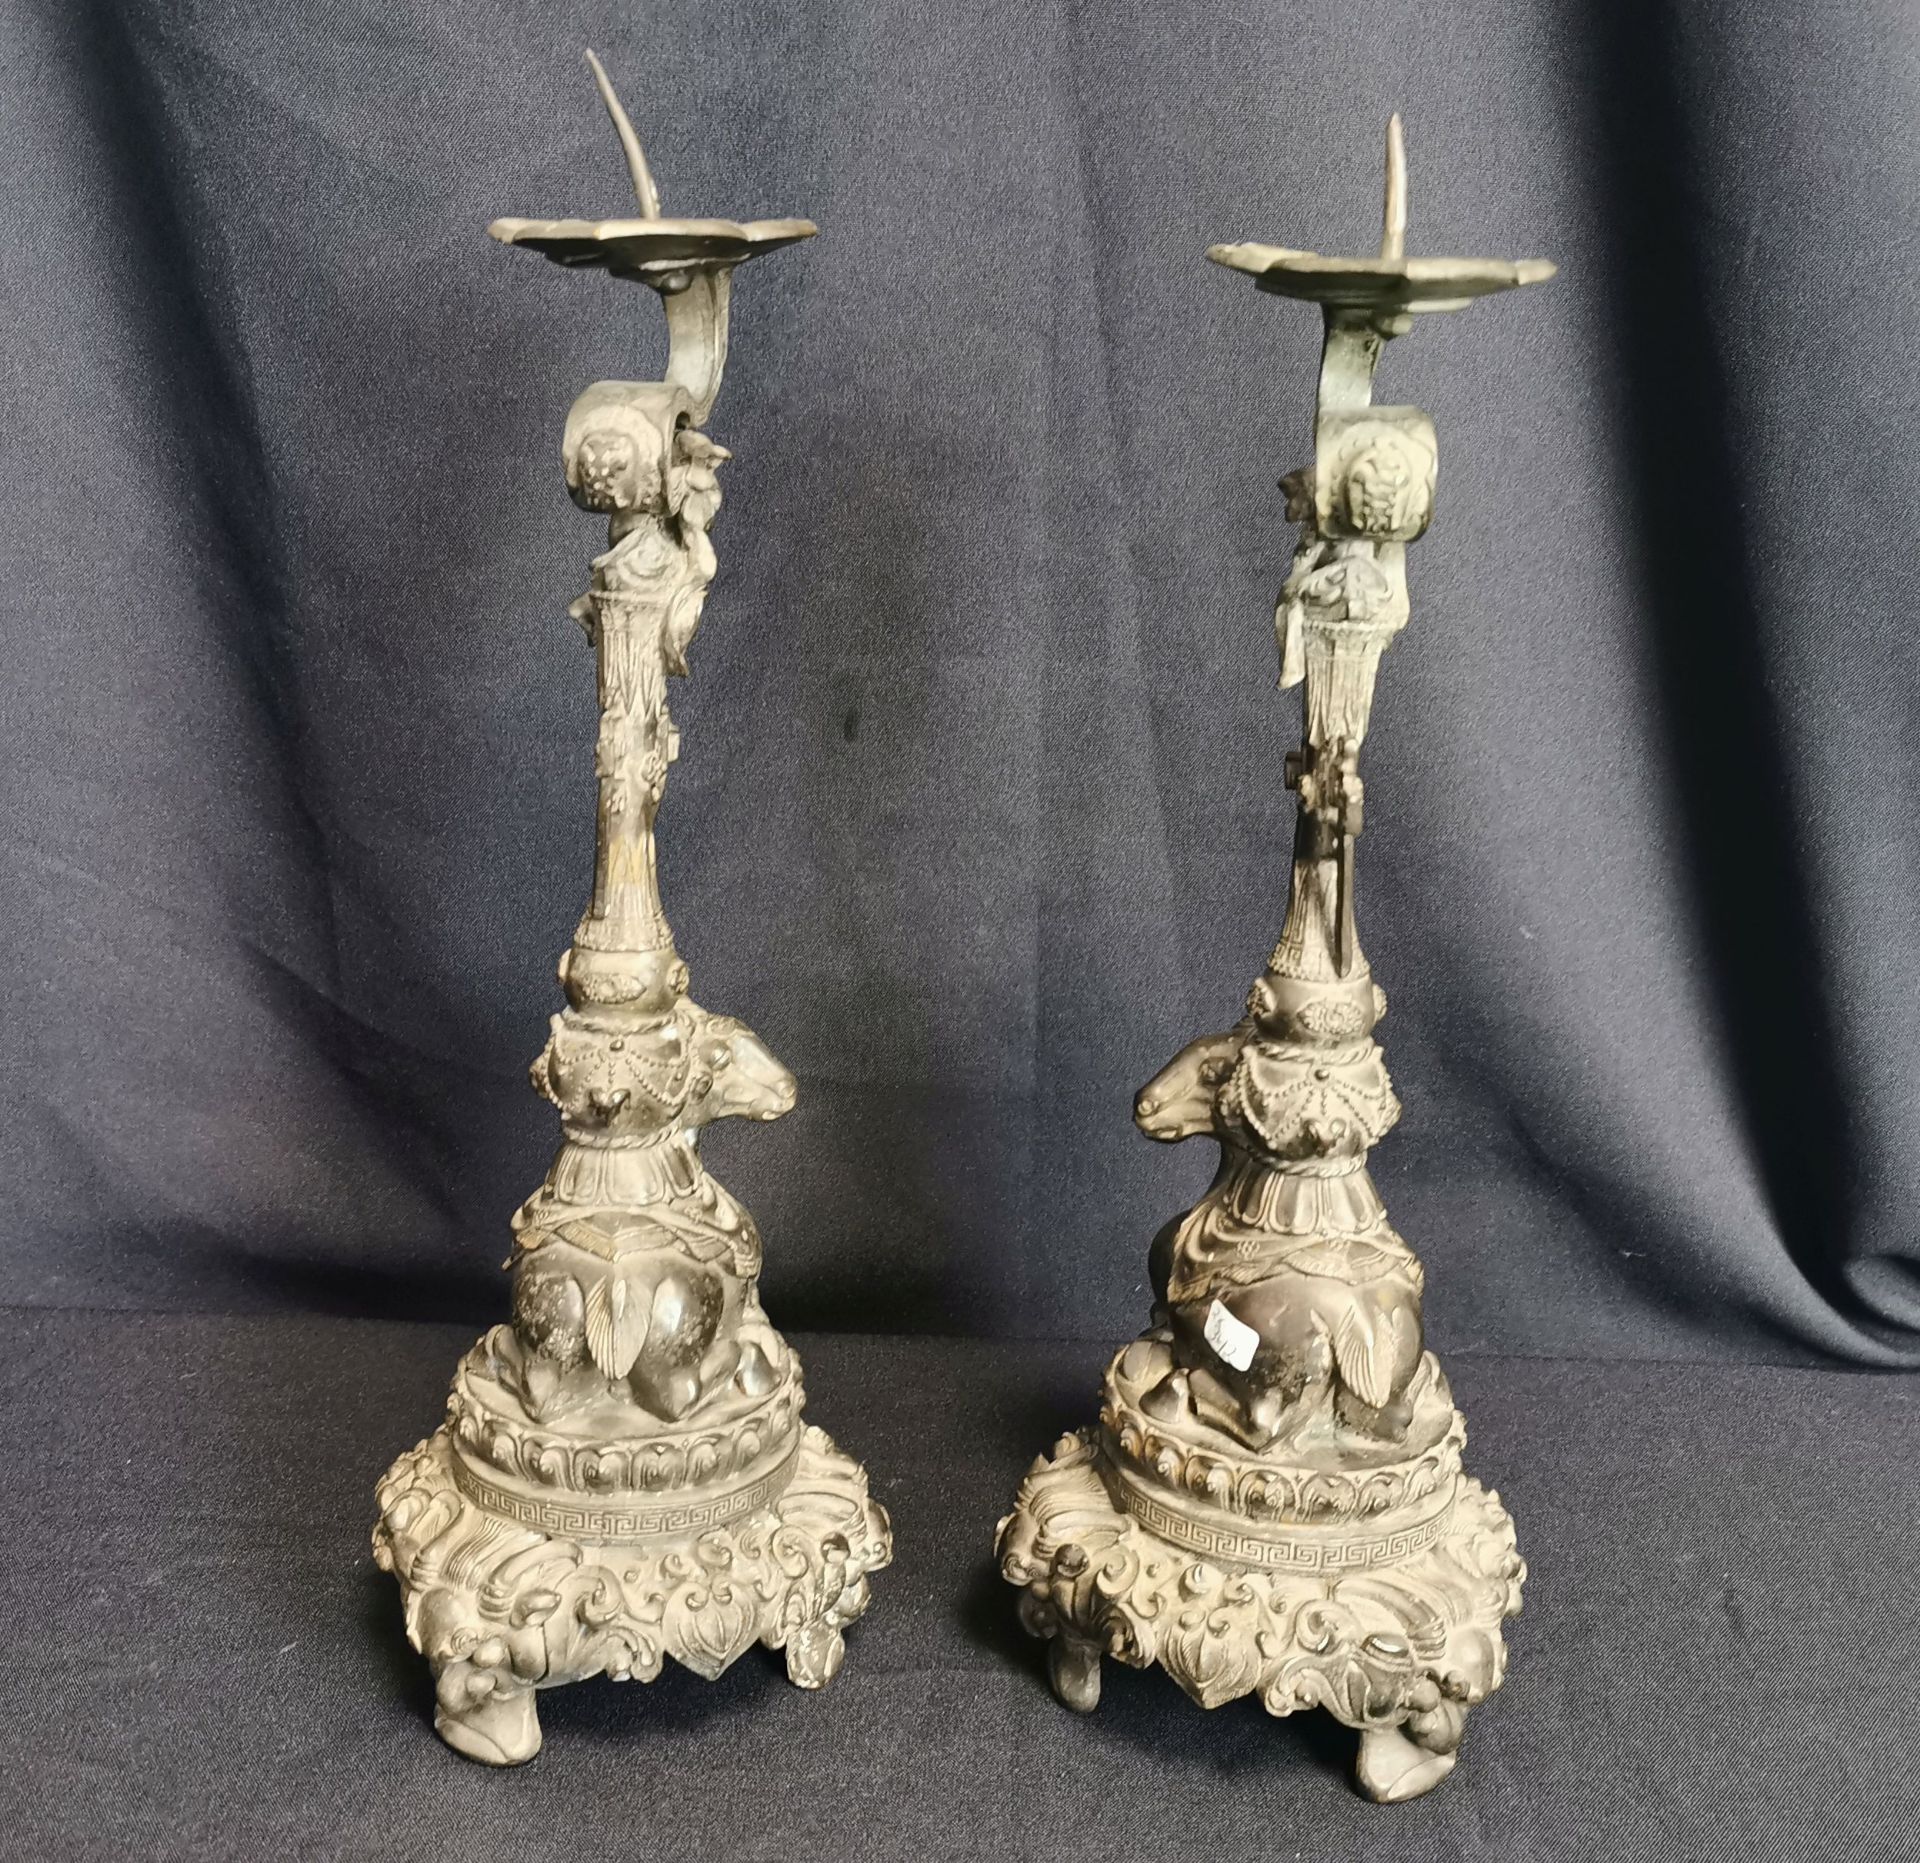 PAIR OF CANDLE STANDS WITH RAMS - Image 4 of 7